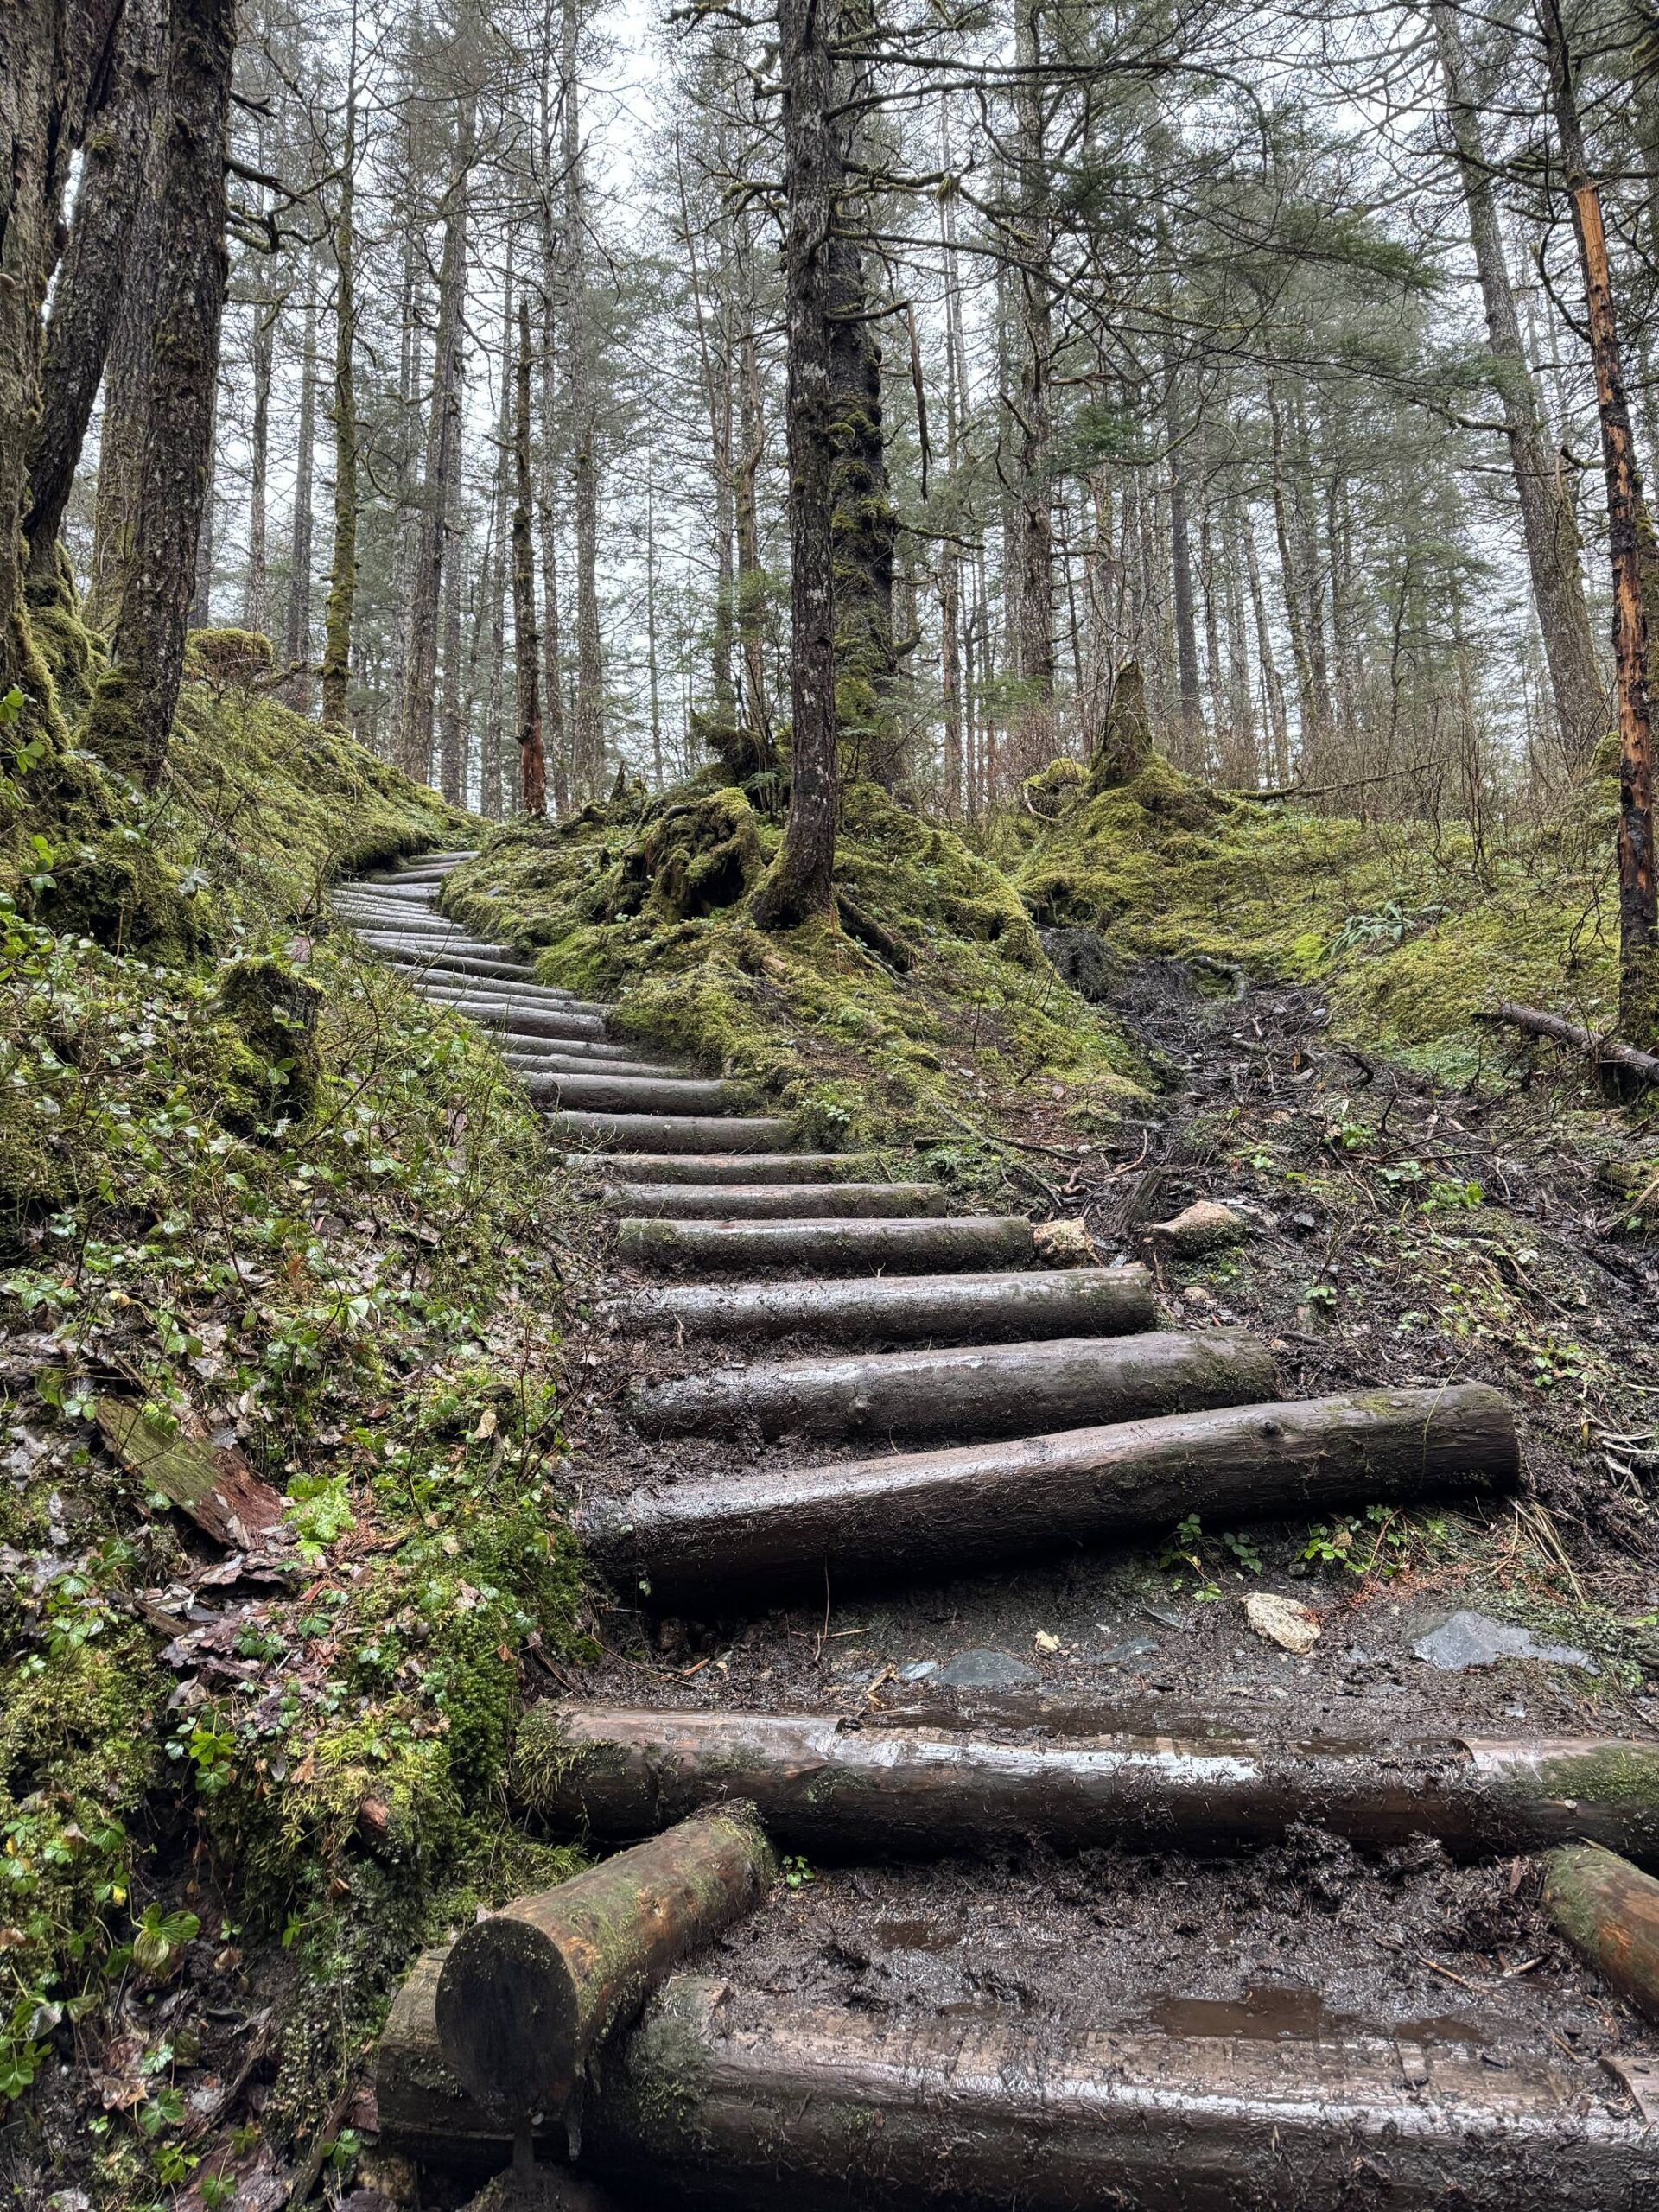 Slick log stairs leading up the Mount Jumbo Trail on Nov. 25. (Photo by Deana Barajas)